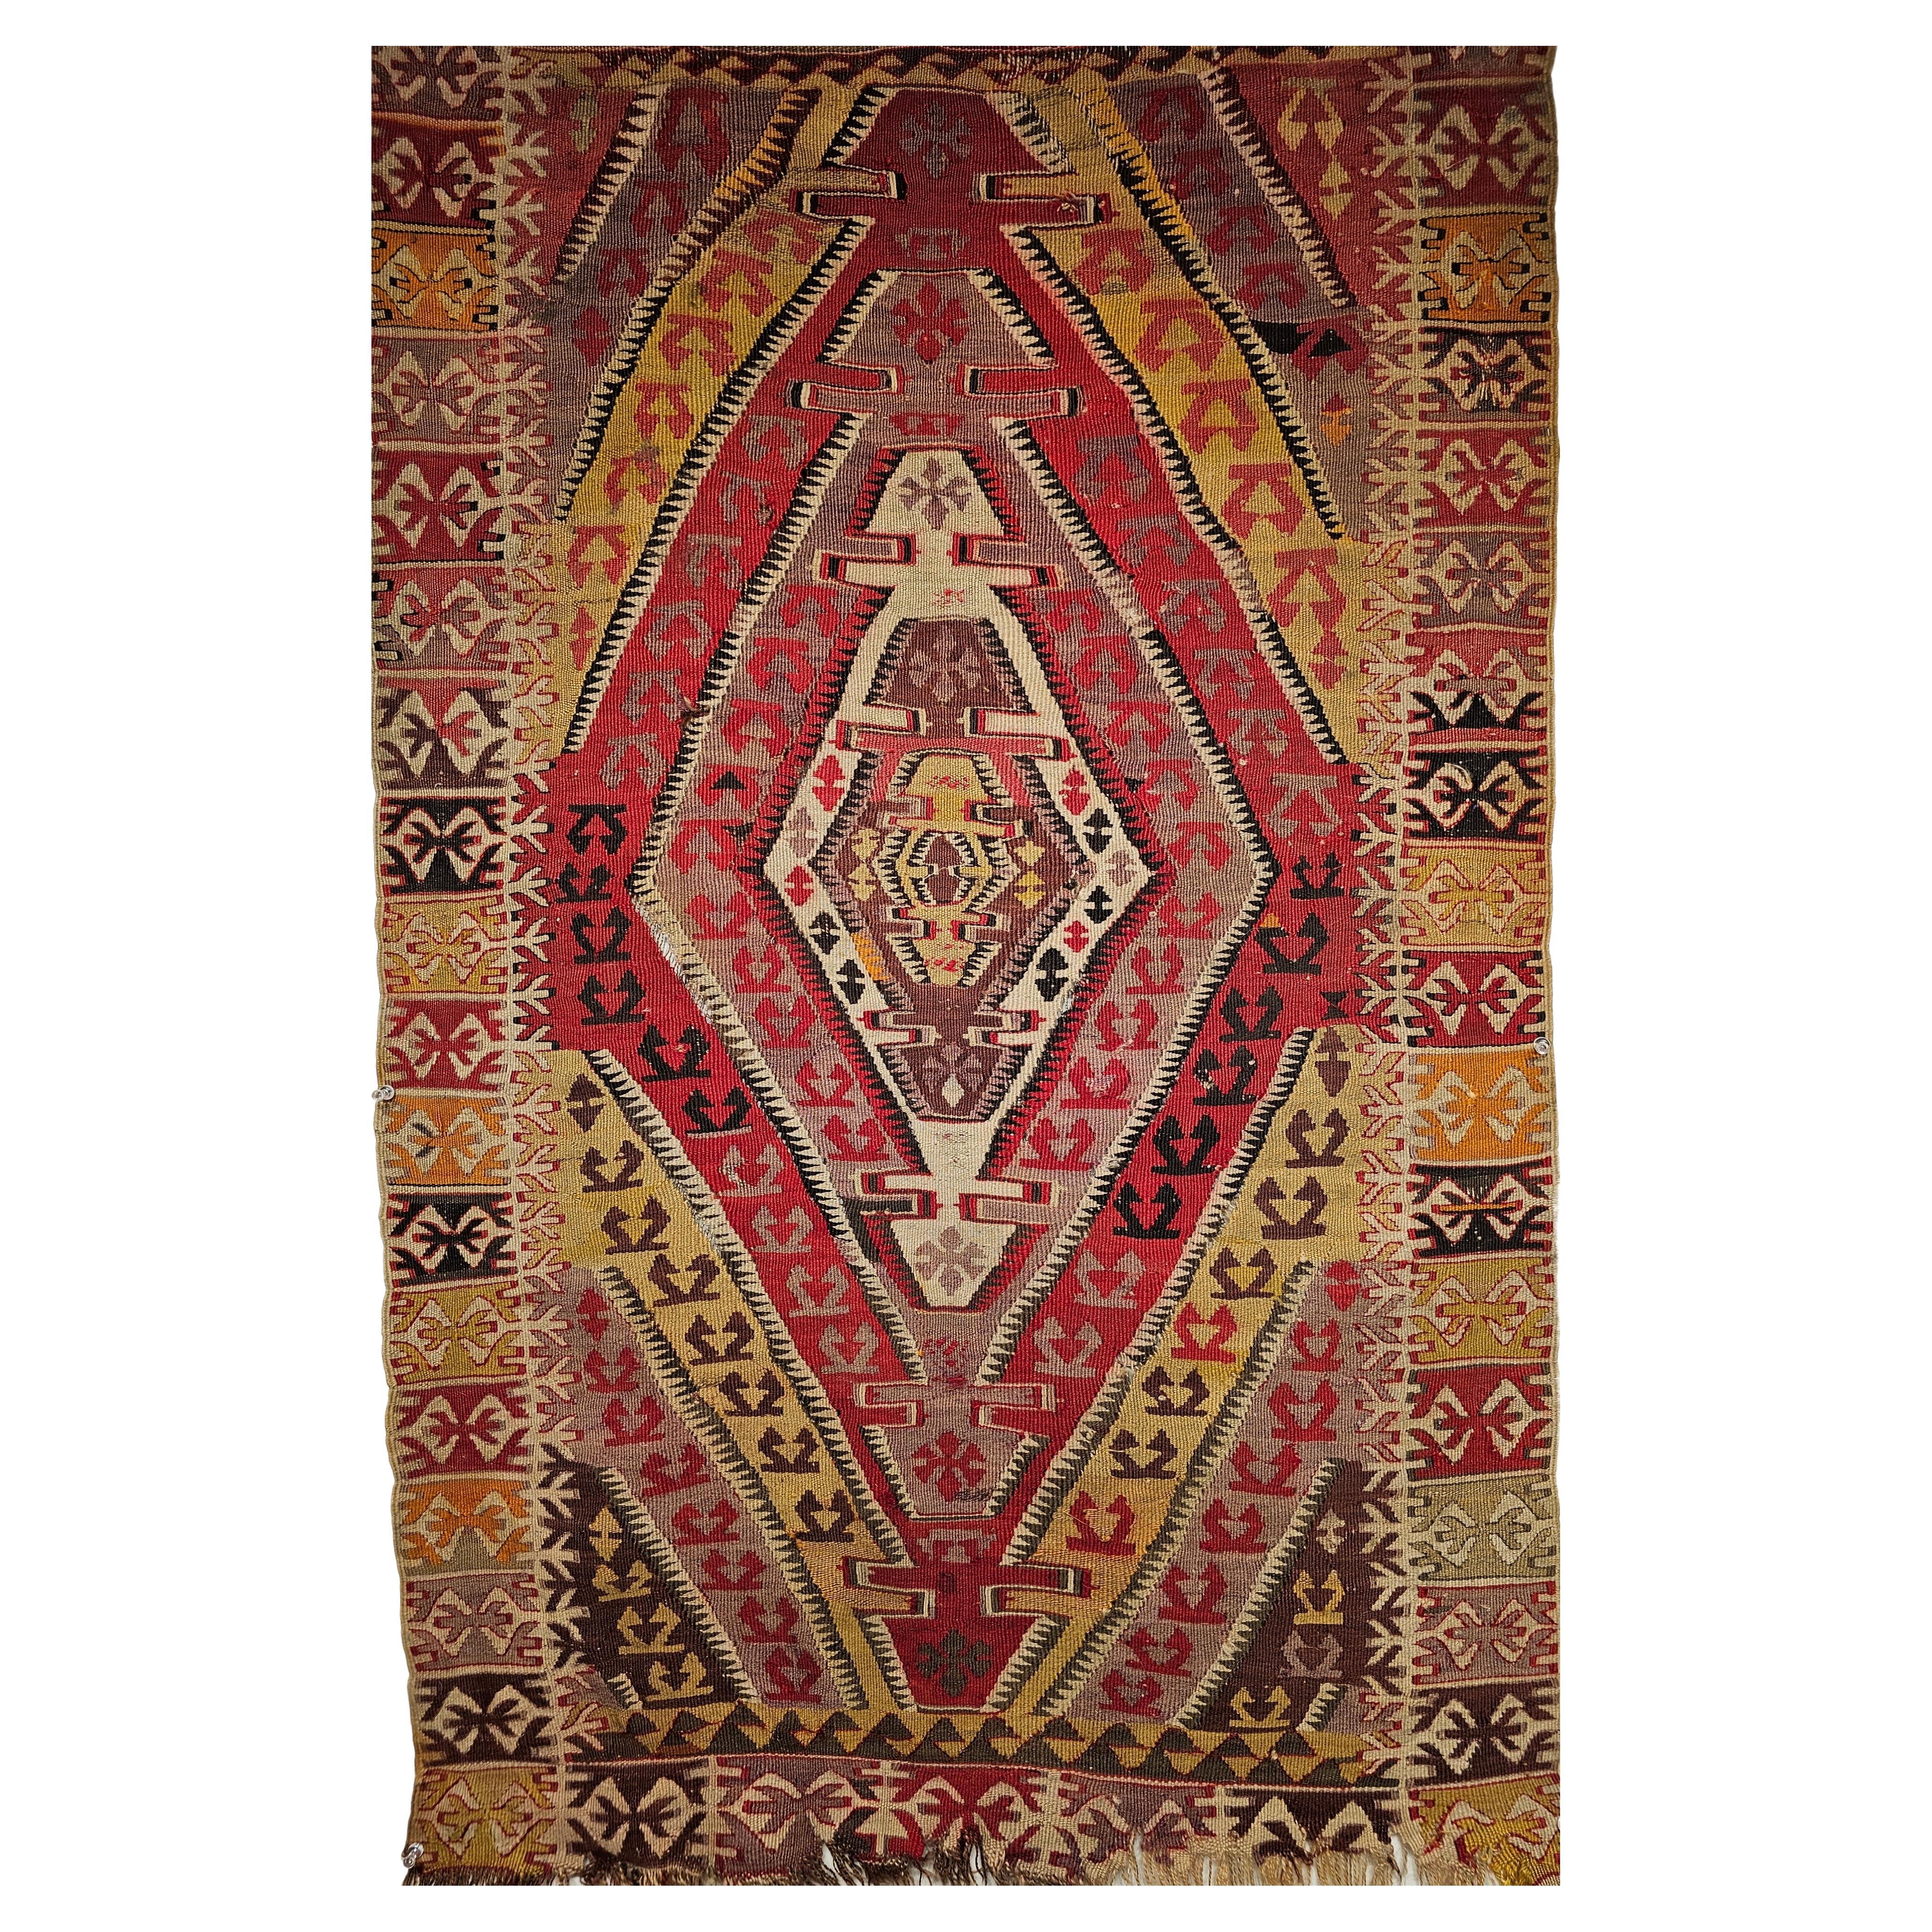 19th Century Anatolian Kilim Area Rug in Medallion Pattern in Red, Yellow, Brown